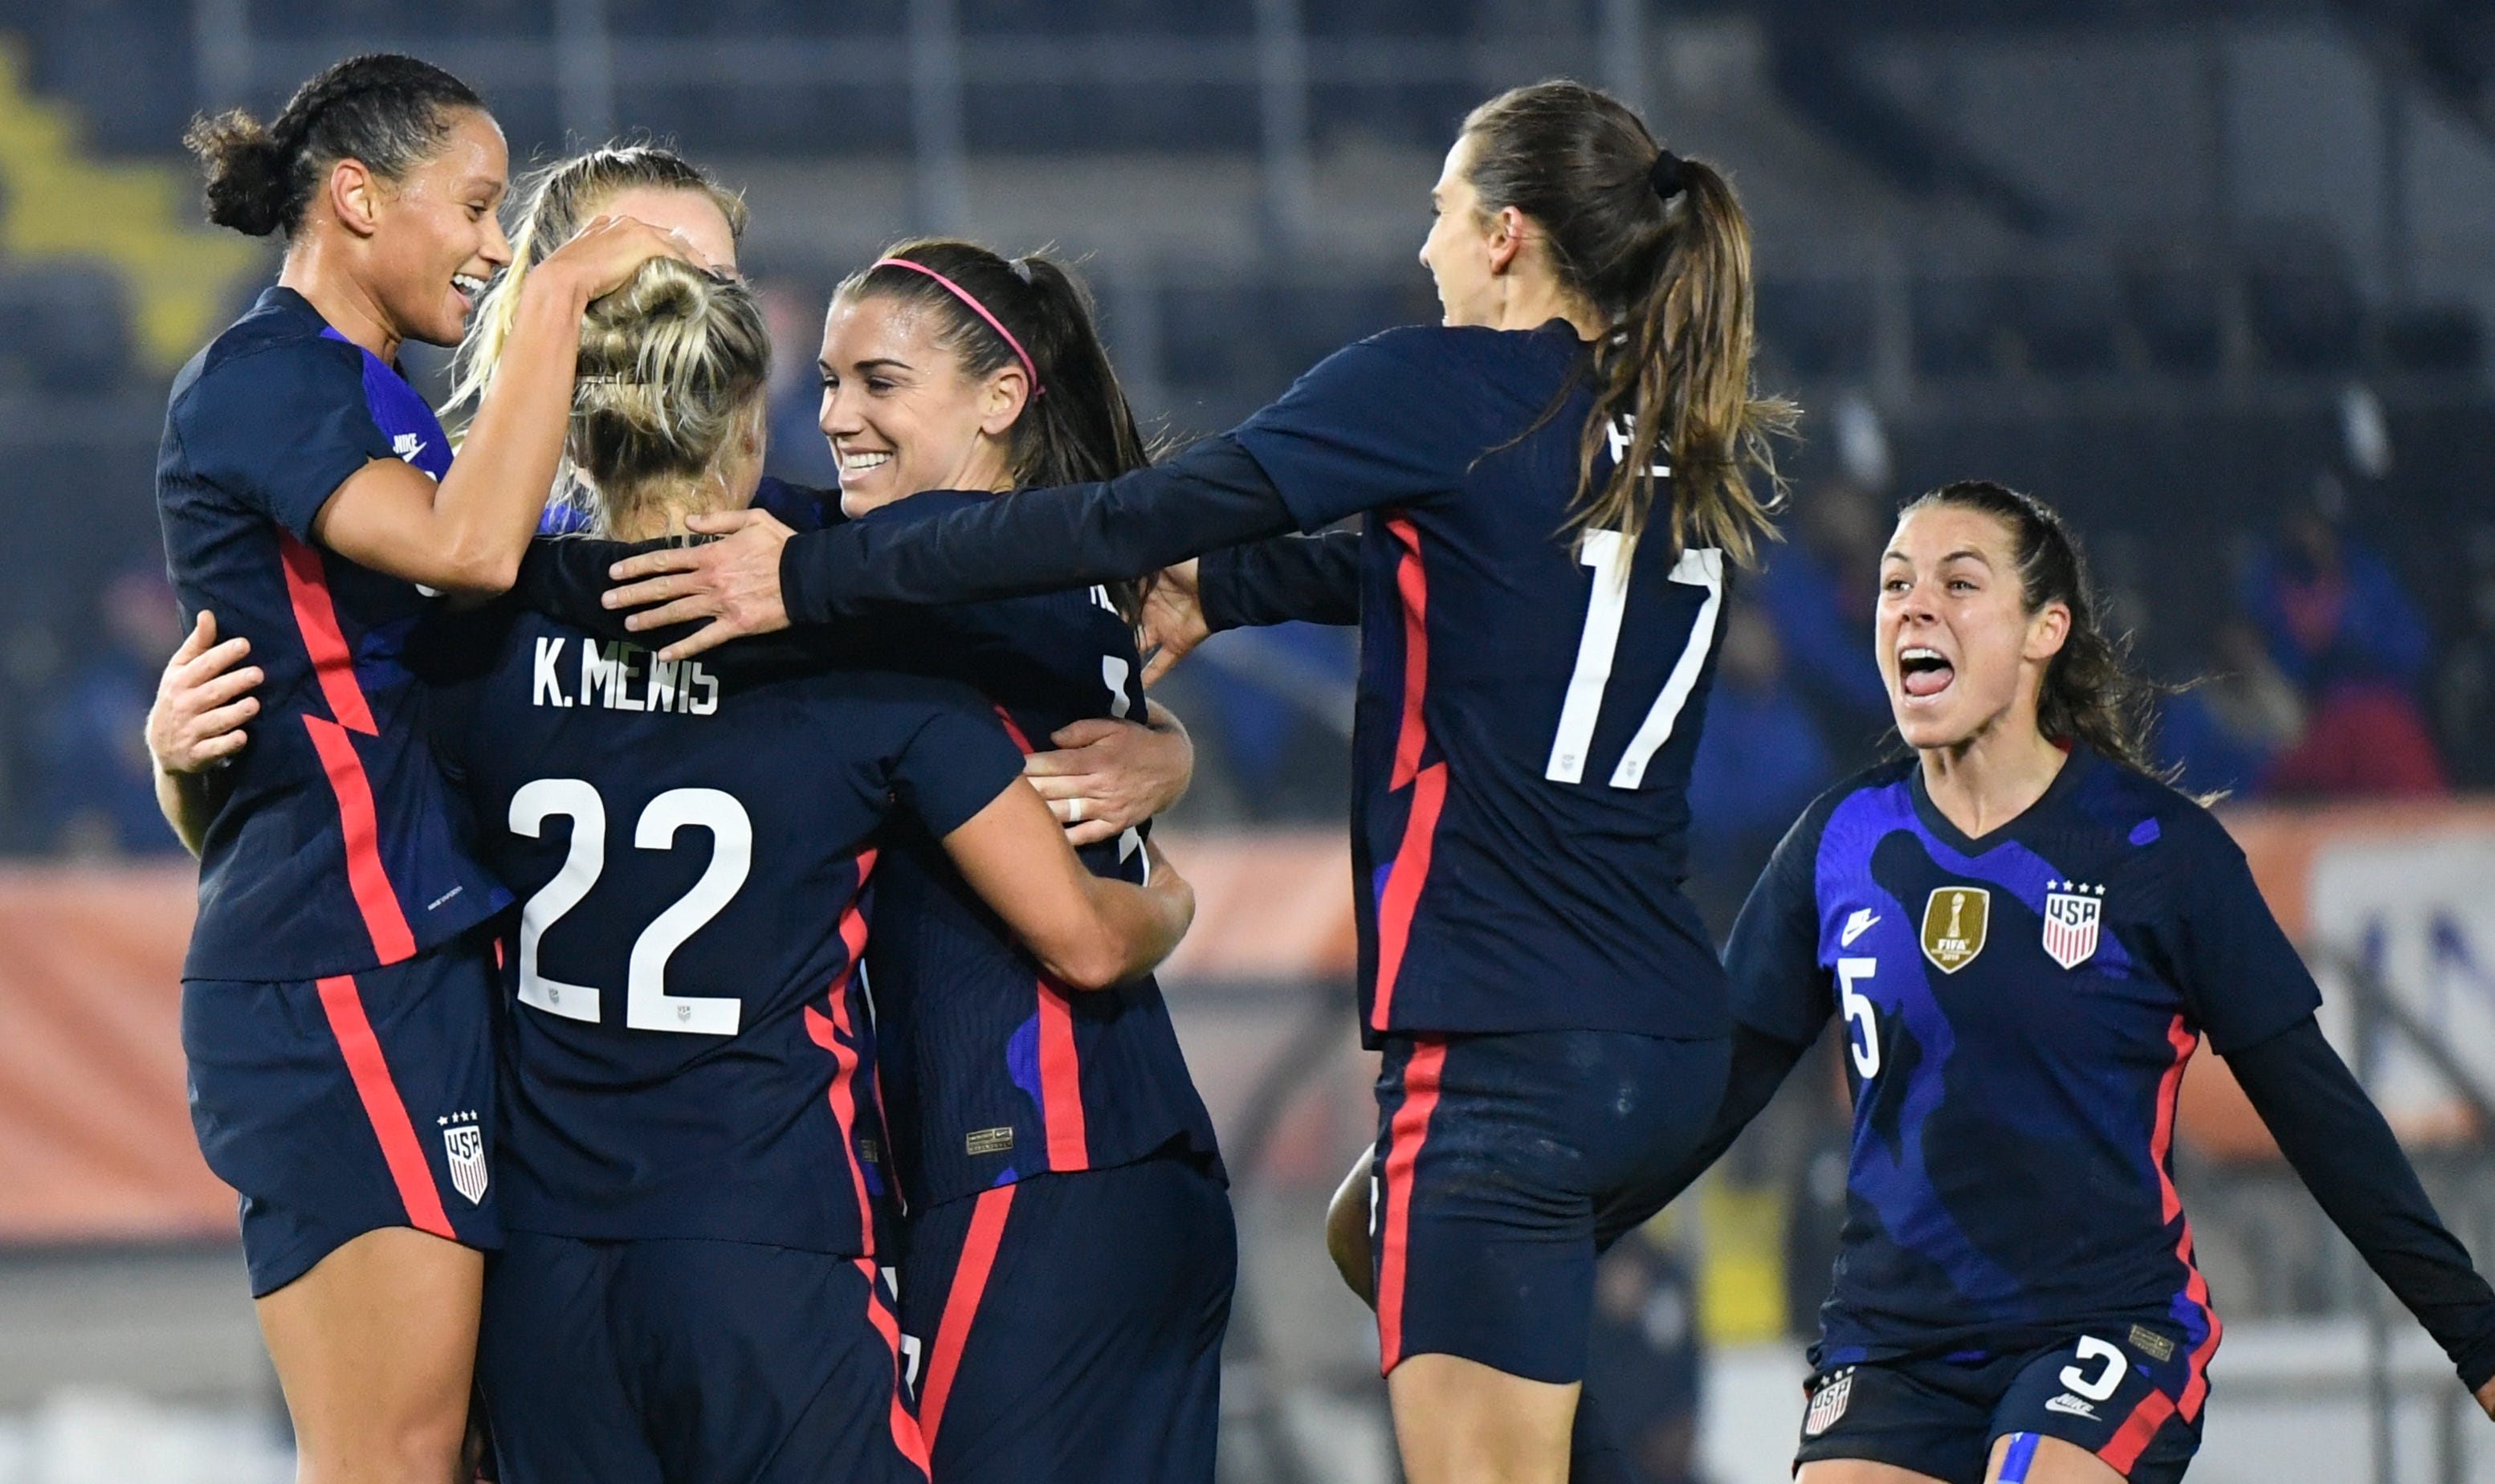 Uswnt Turns Focus Back To Equal Pay After Resolving Workplace Claims